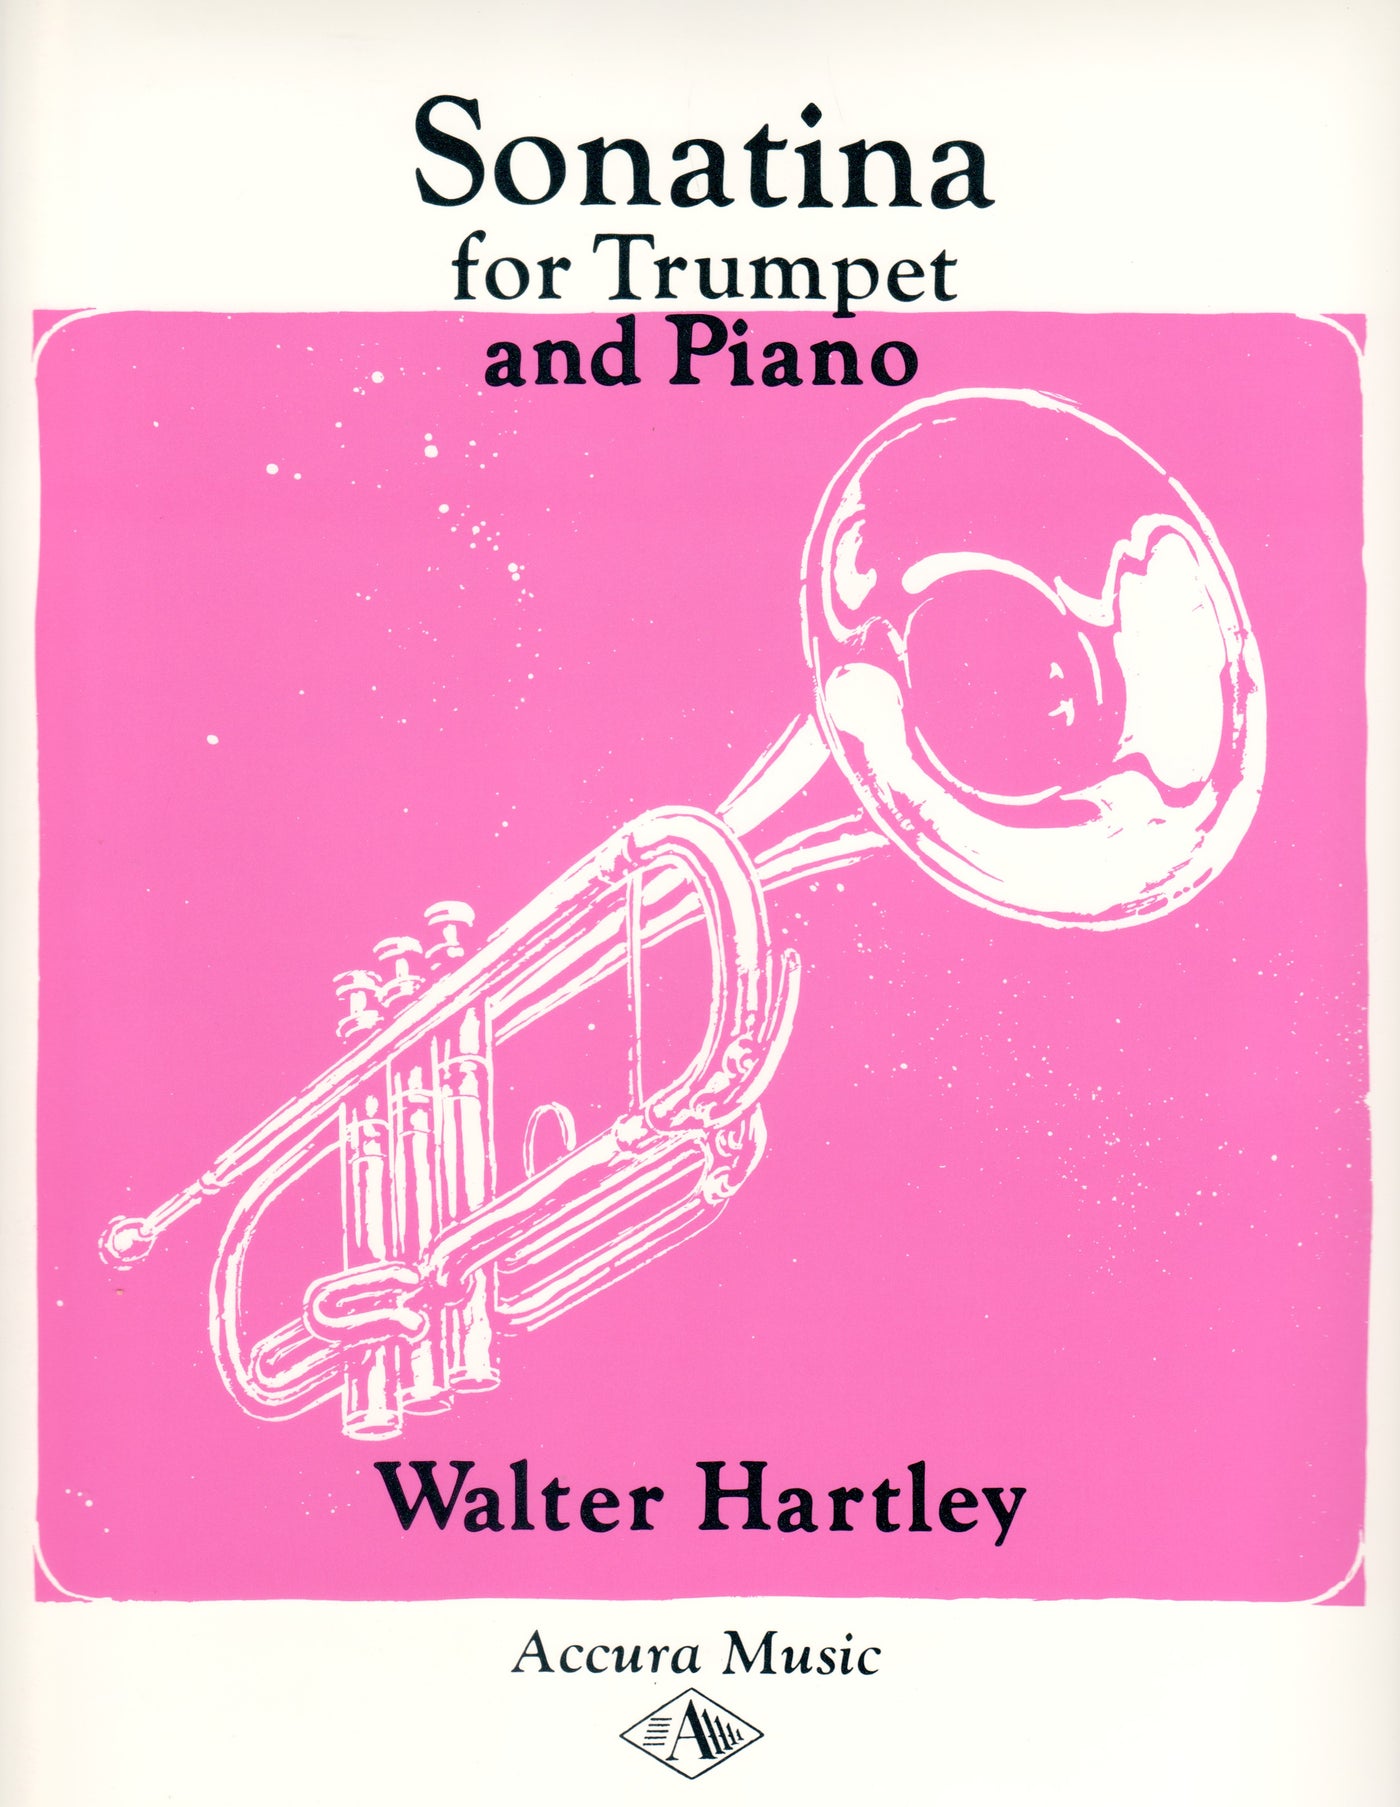 Mad World - Bb Trumpet Sheet music for Trumpet in b-flat (Solo)